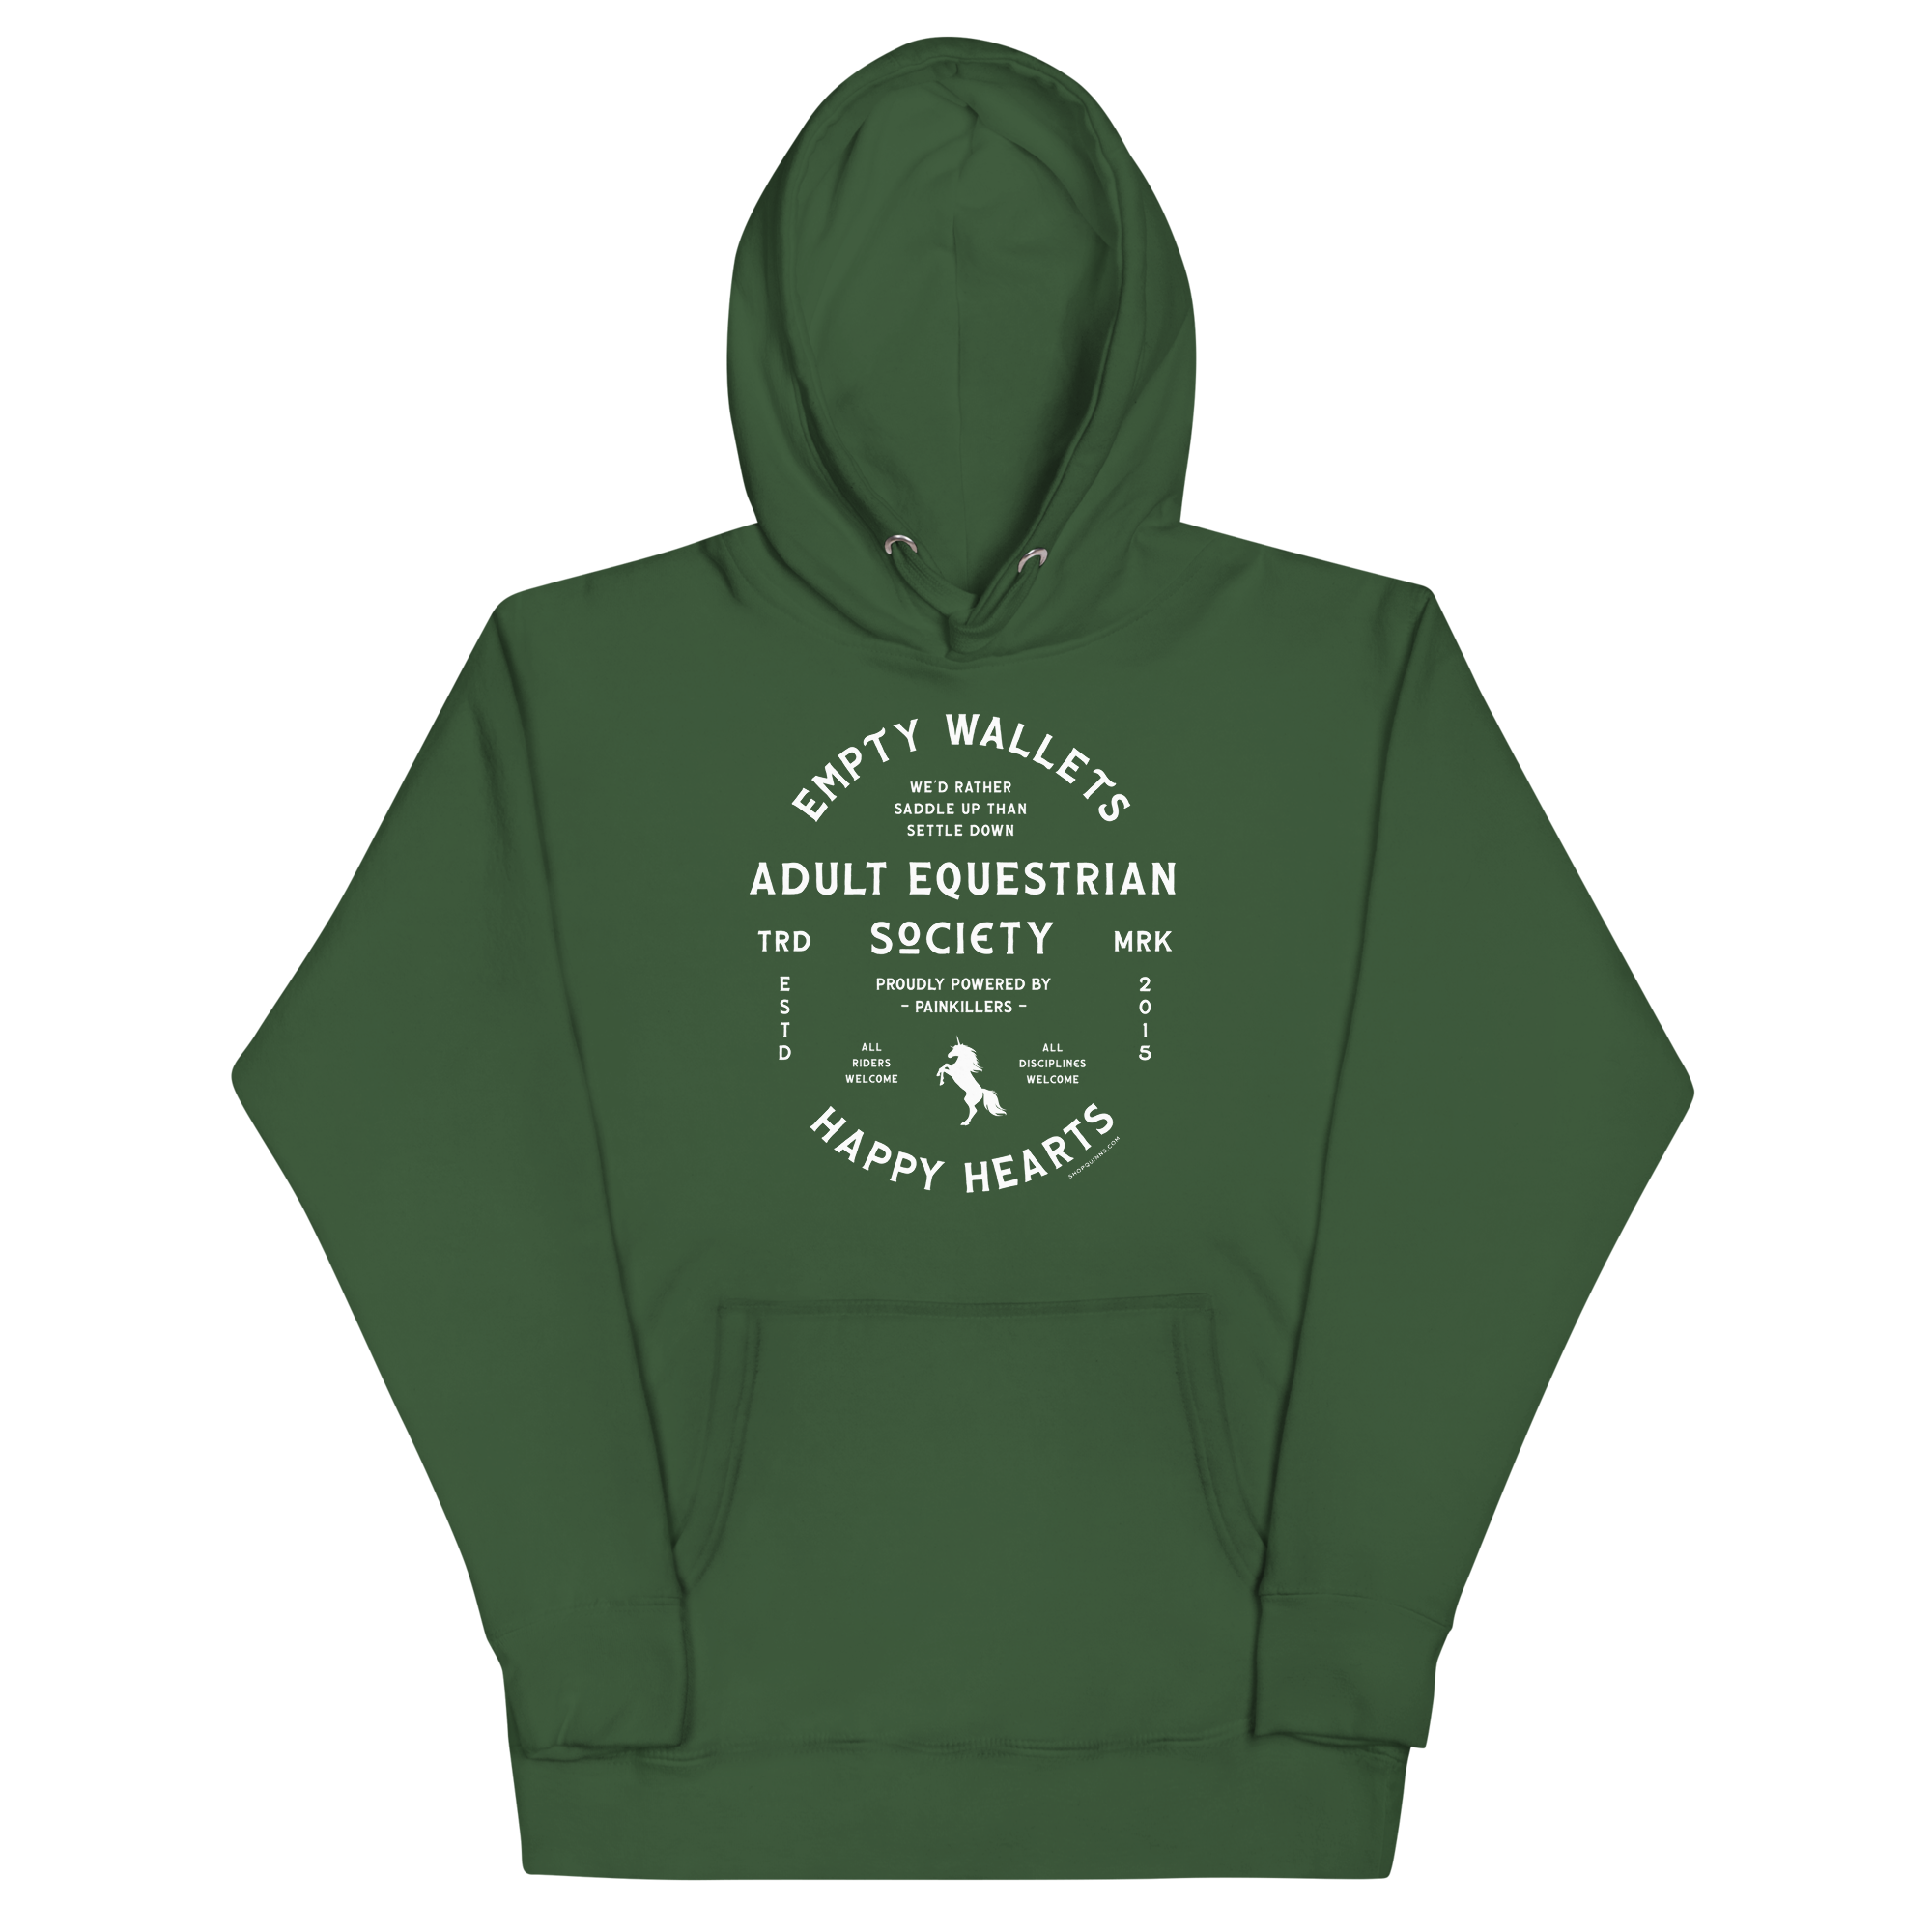 Adult Equestrian Society Hoodie - White